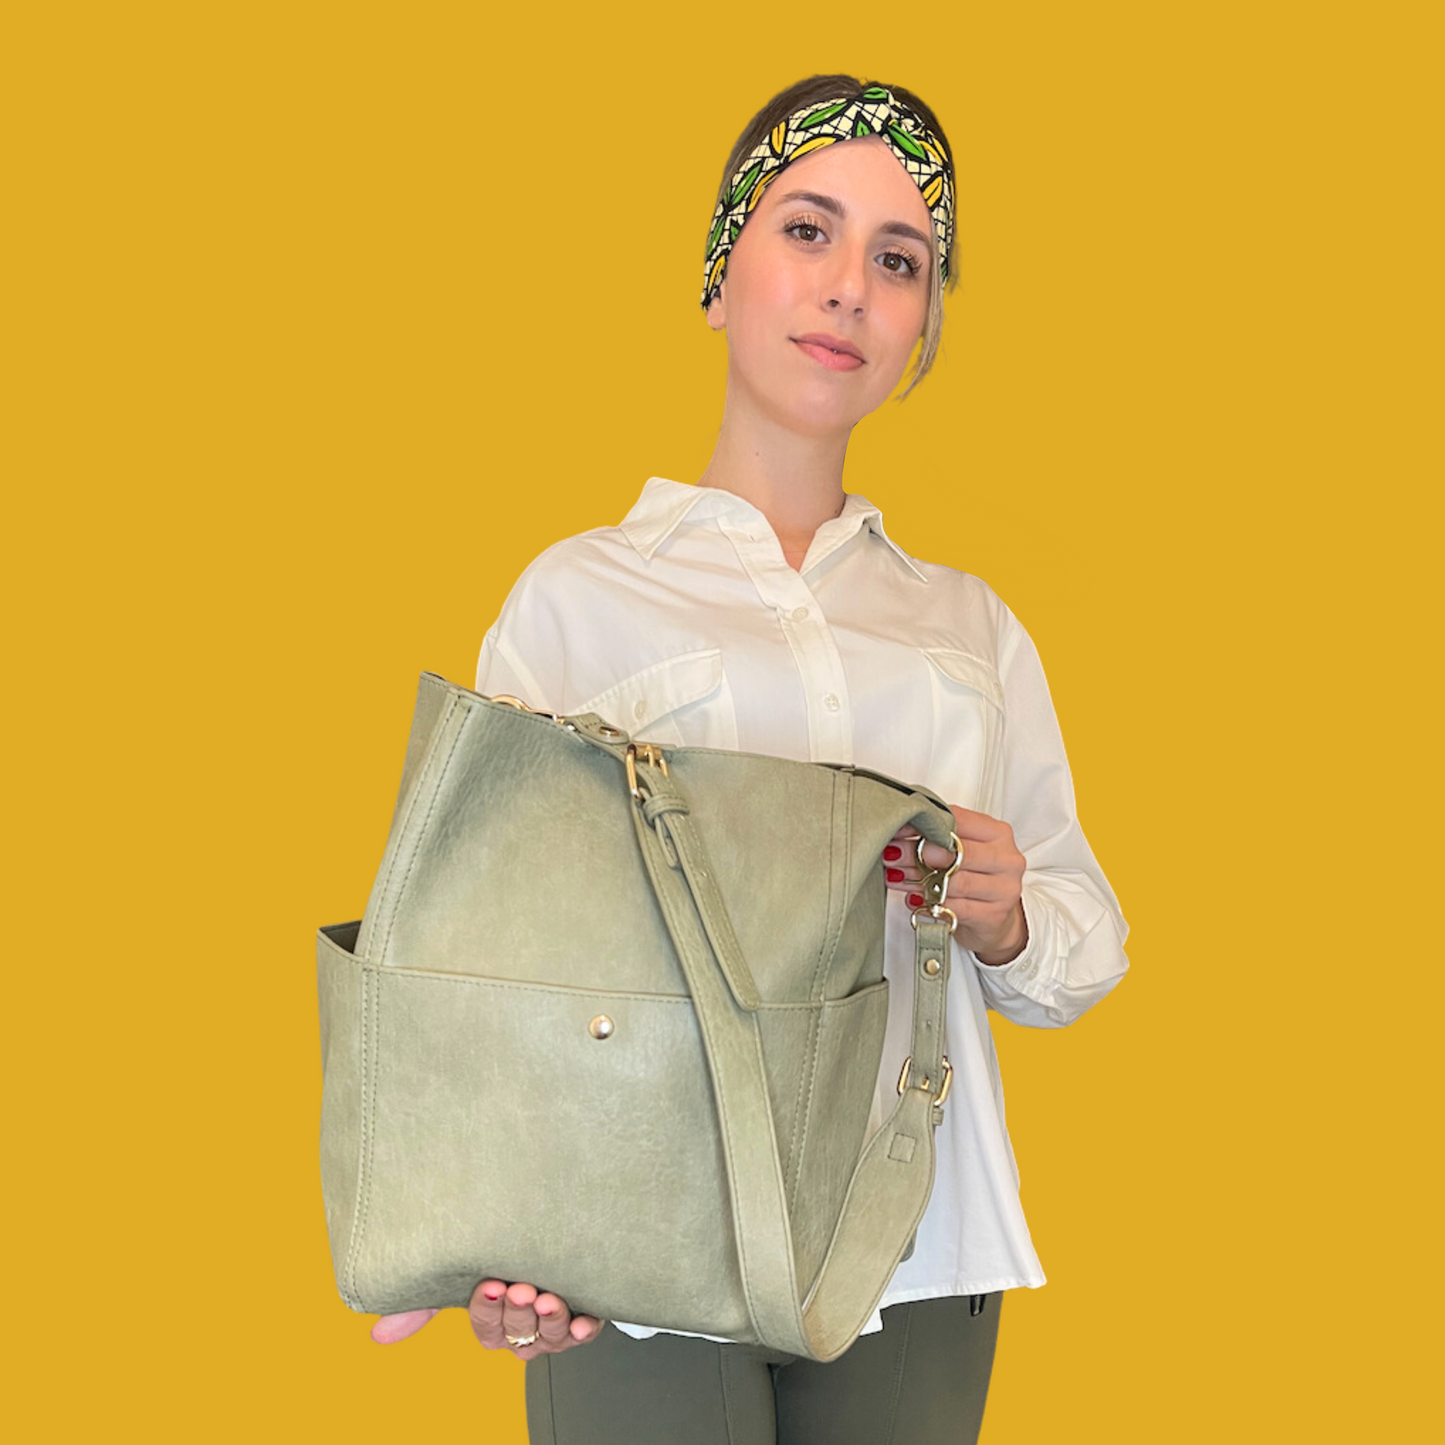 1. Handbag - Light olive green leather with golden accents